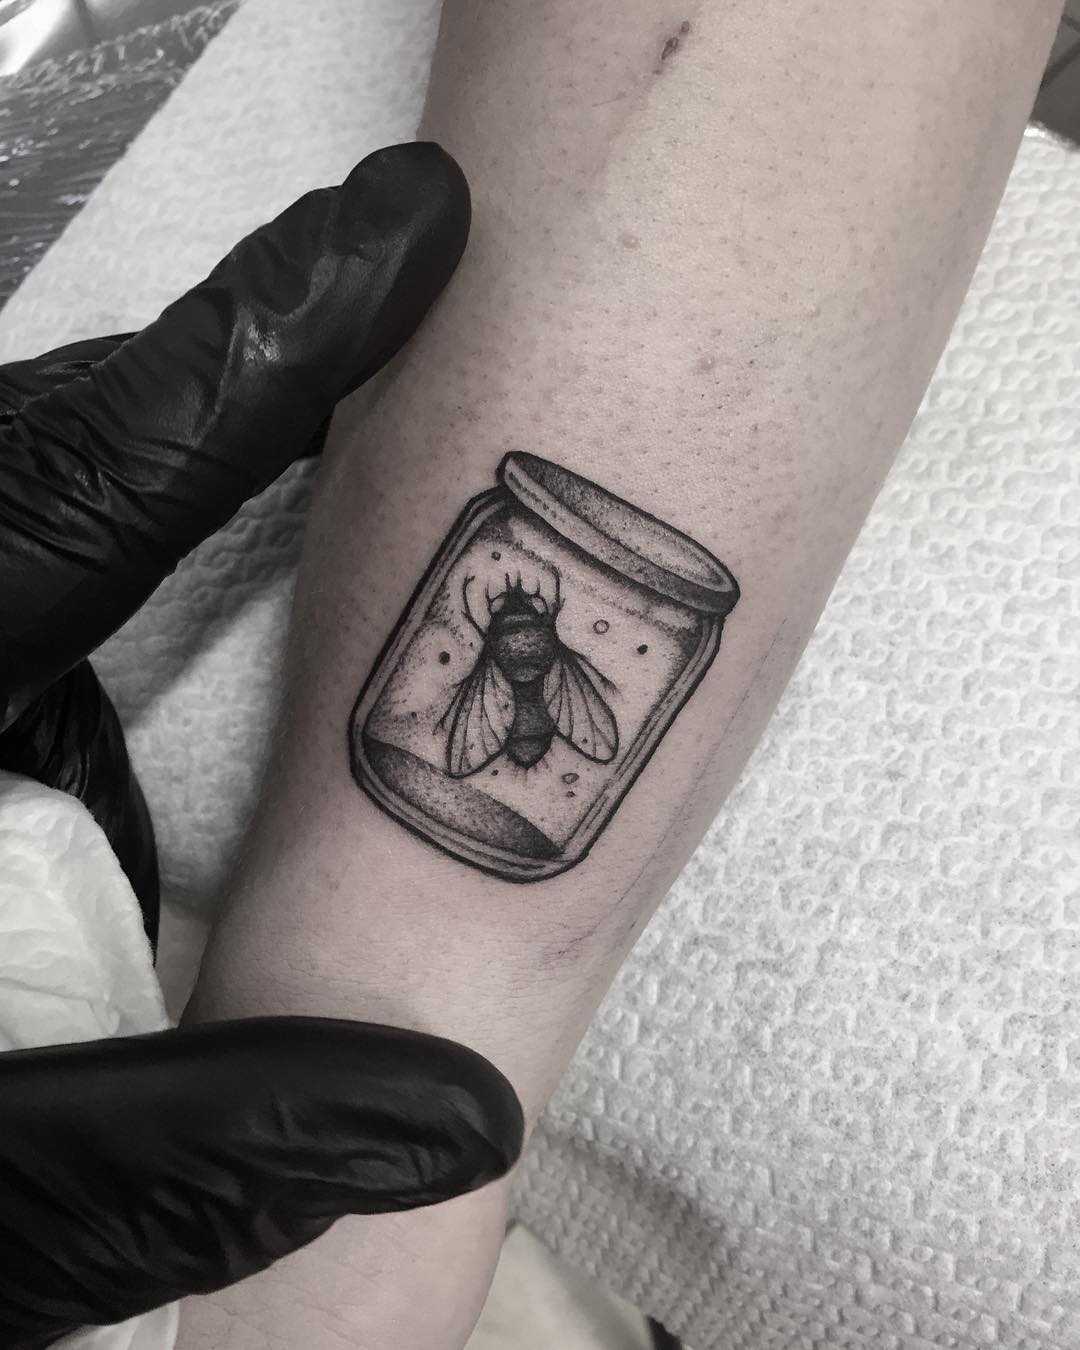 Fly in a jar done at Primordial Pain Tattoo, Milano